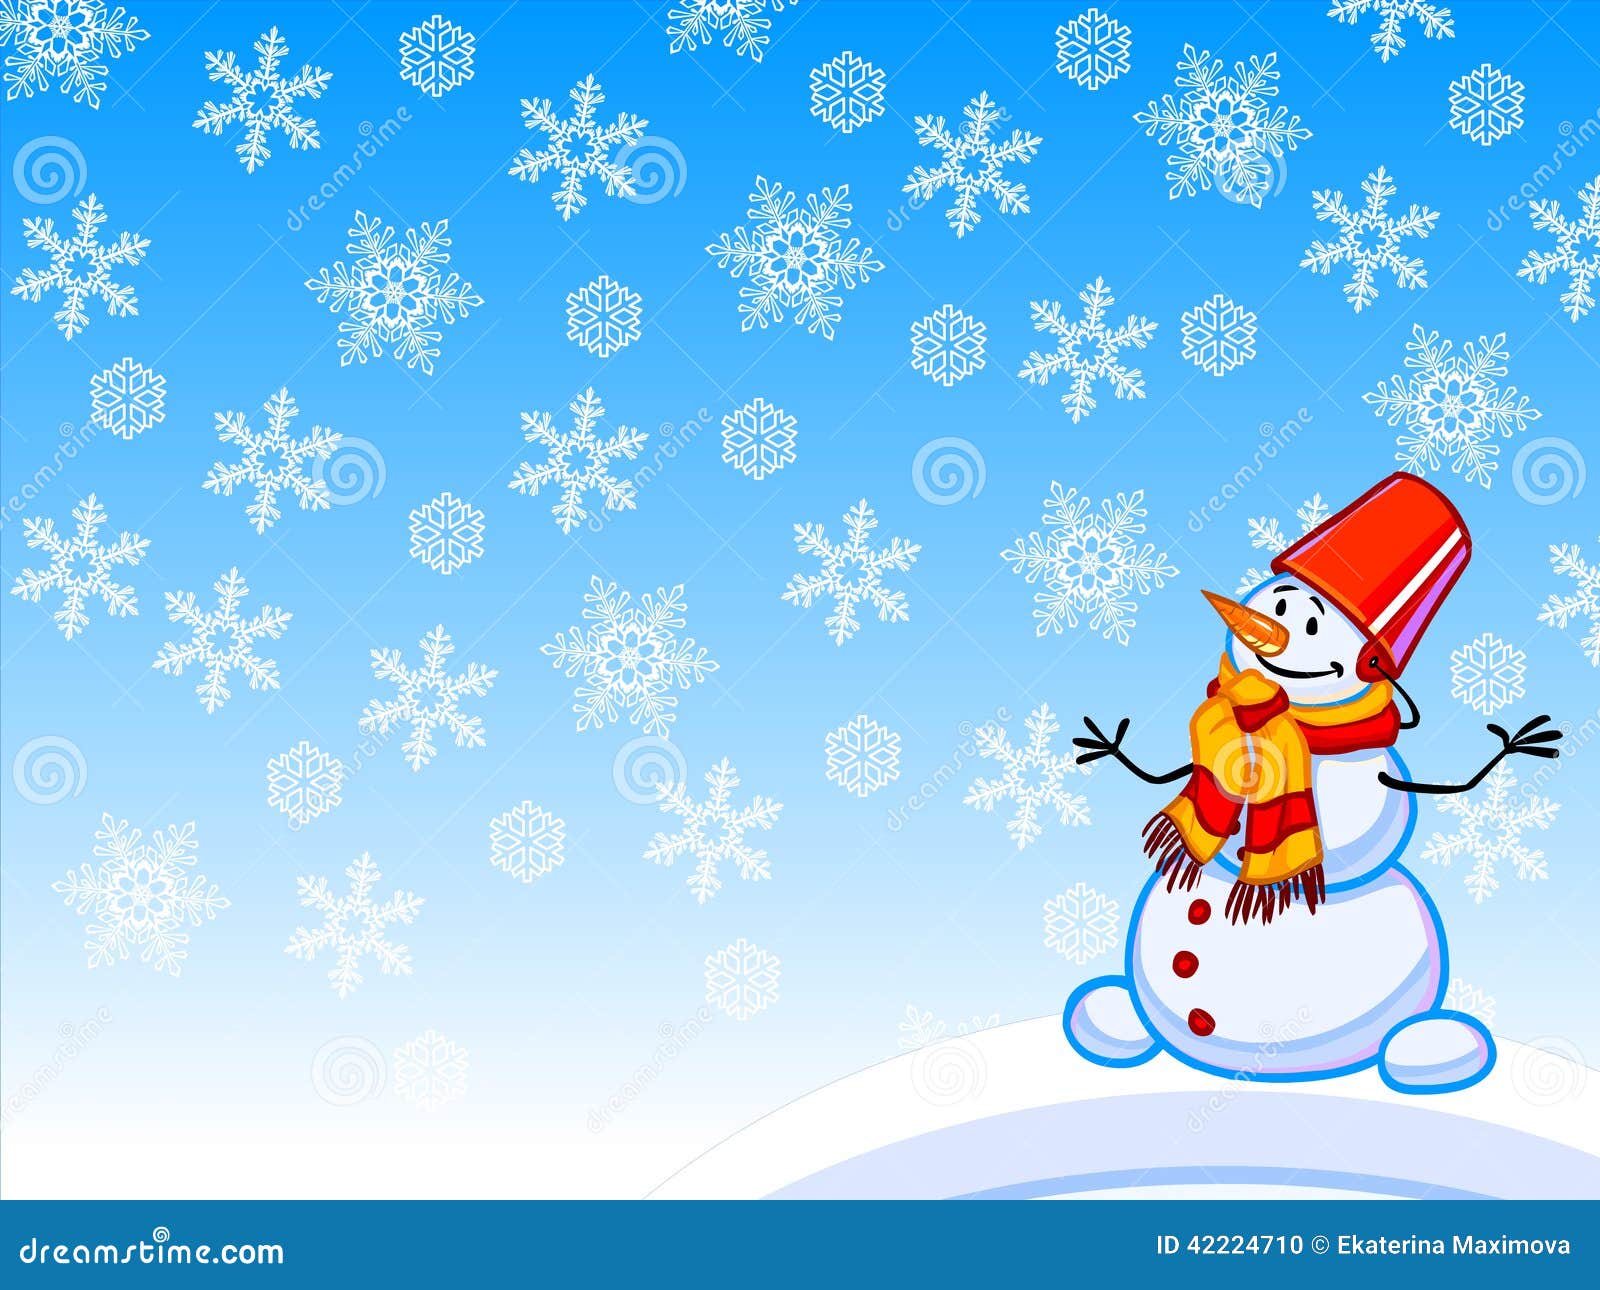 The Winter Cartoon Illustration Of A Snowman With Snowflakes. Stock